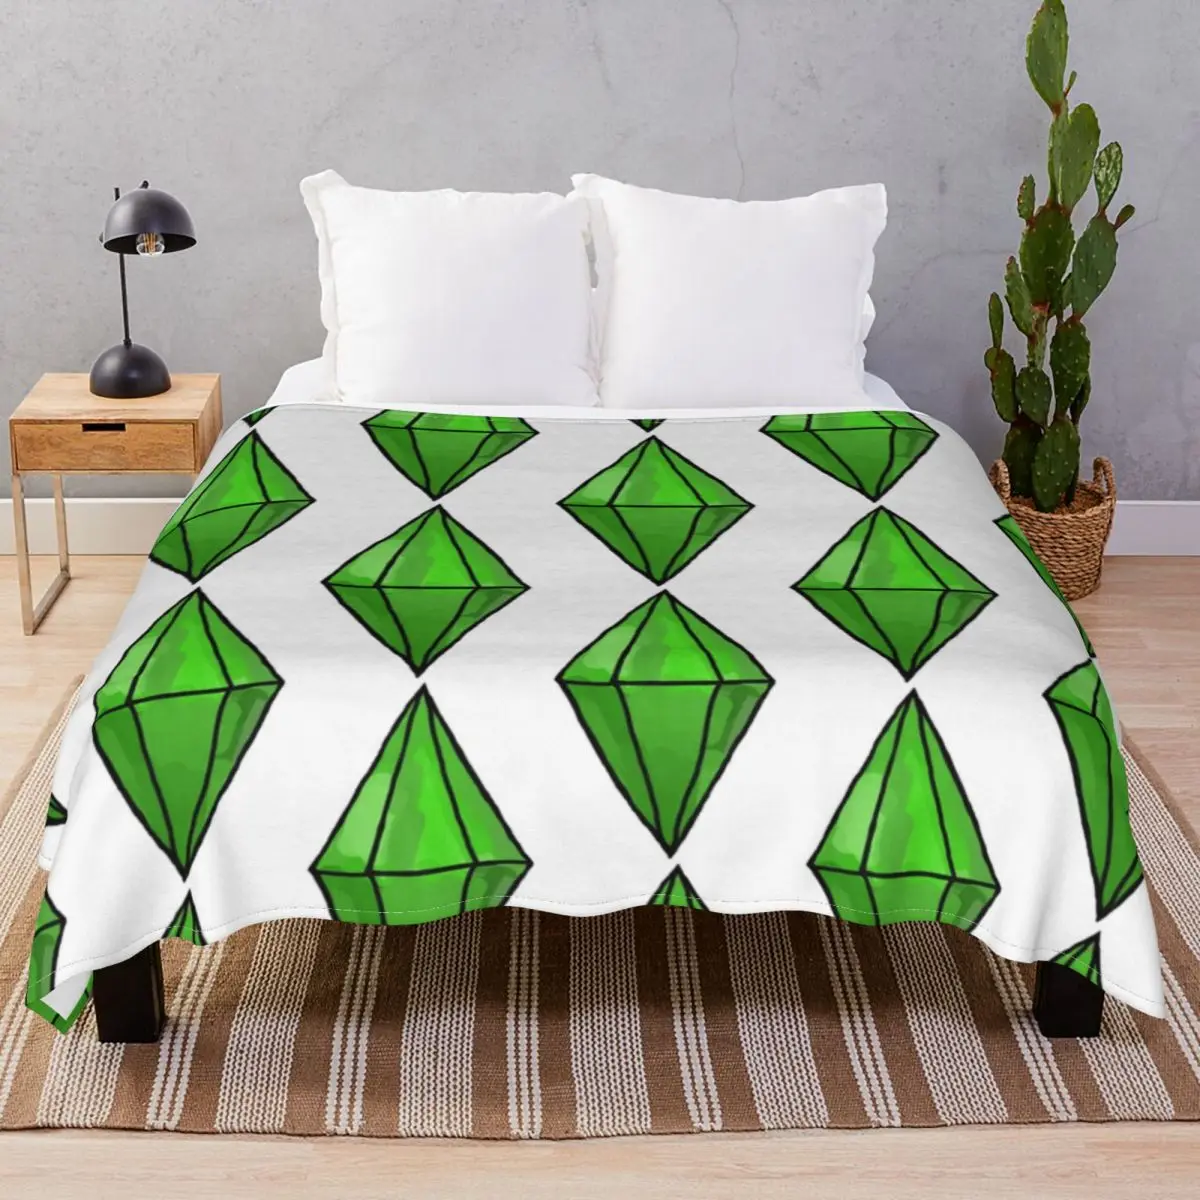 Giant Plumbob Blanket Coral Fleece Plush Decoration Portable Unisex Throw Blankets for Bed Home Couch Camp Office